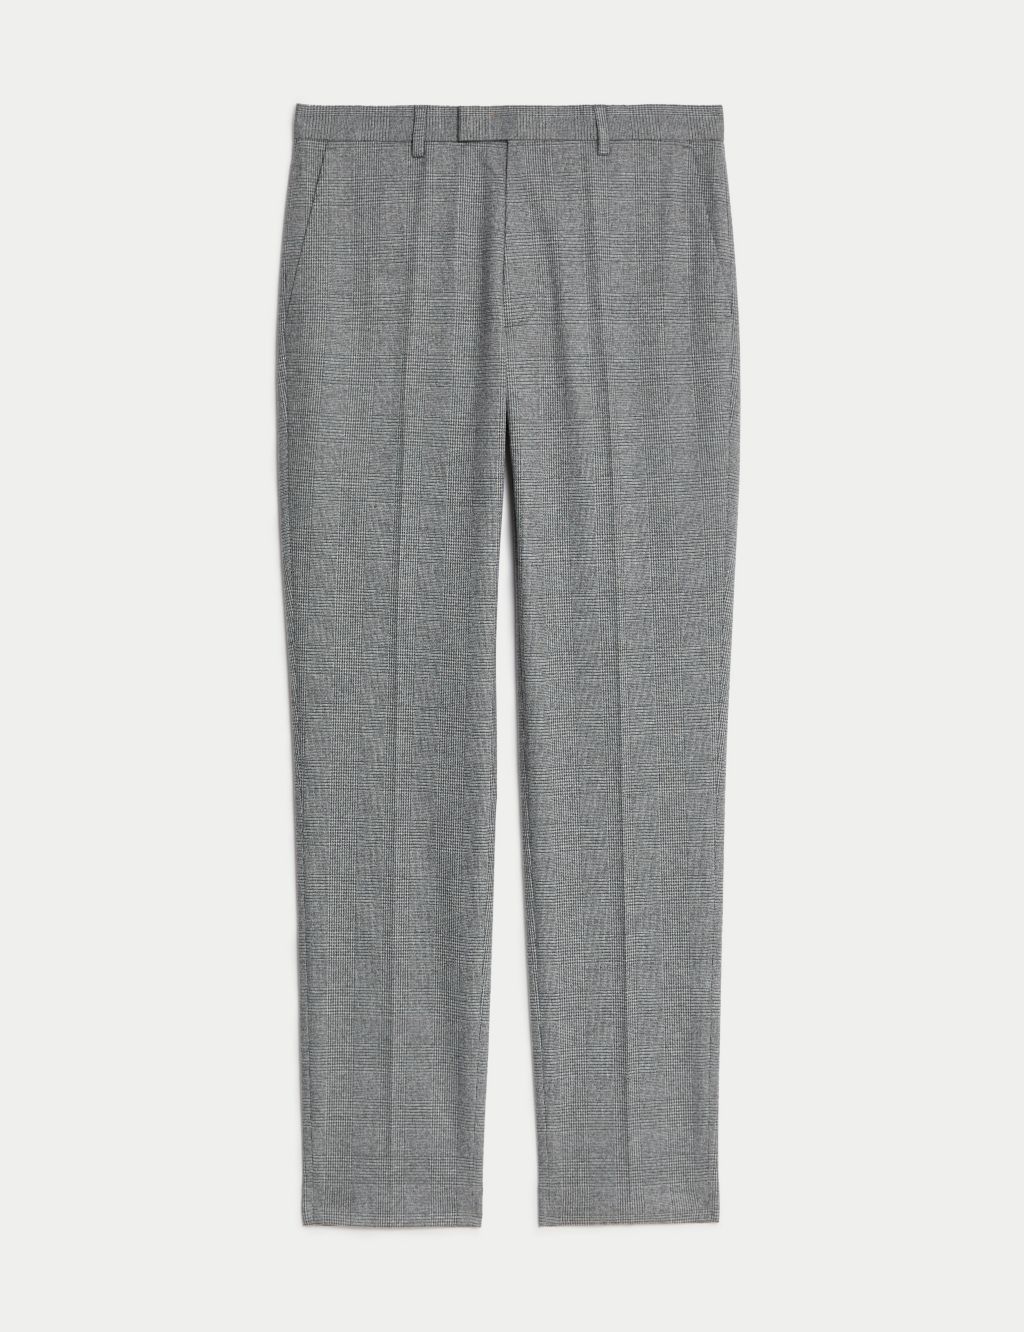 Tailored Fit Check Stretch Trousers image 7